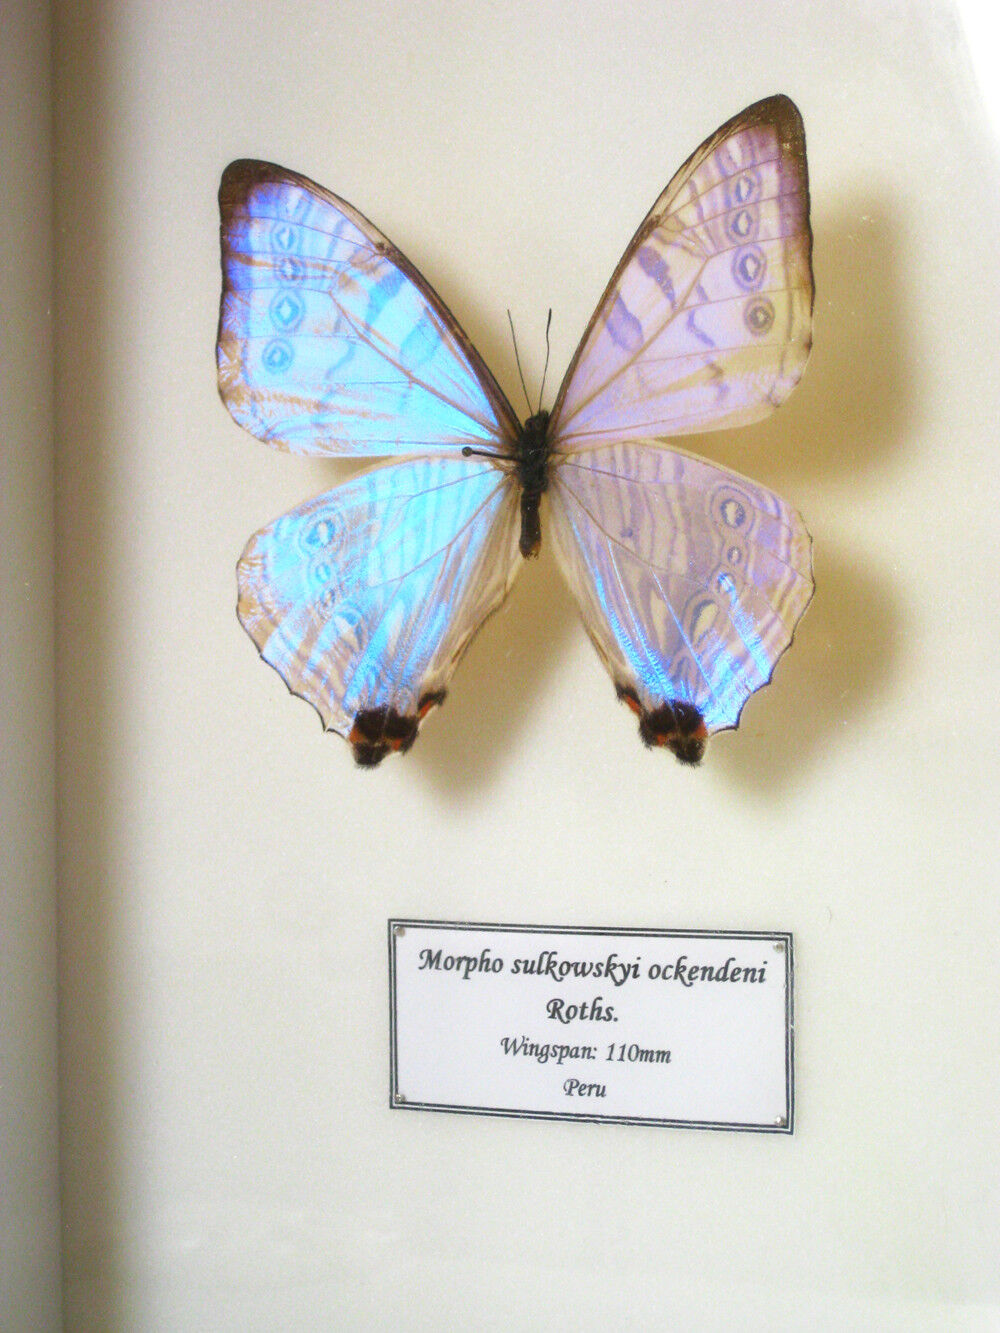 ::REAL MOTHER OF PEARL PERUVIAN BUTTERFLY MORPHO SULKOWSKYI OCKENDENI FRAMED